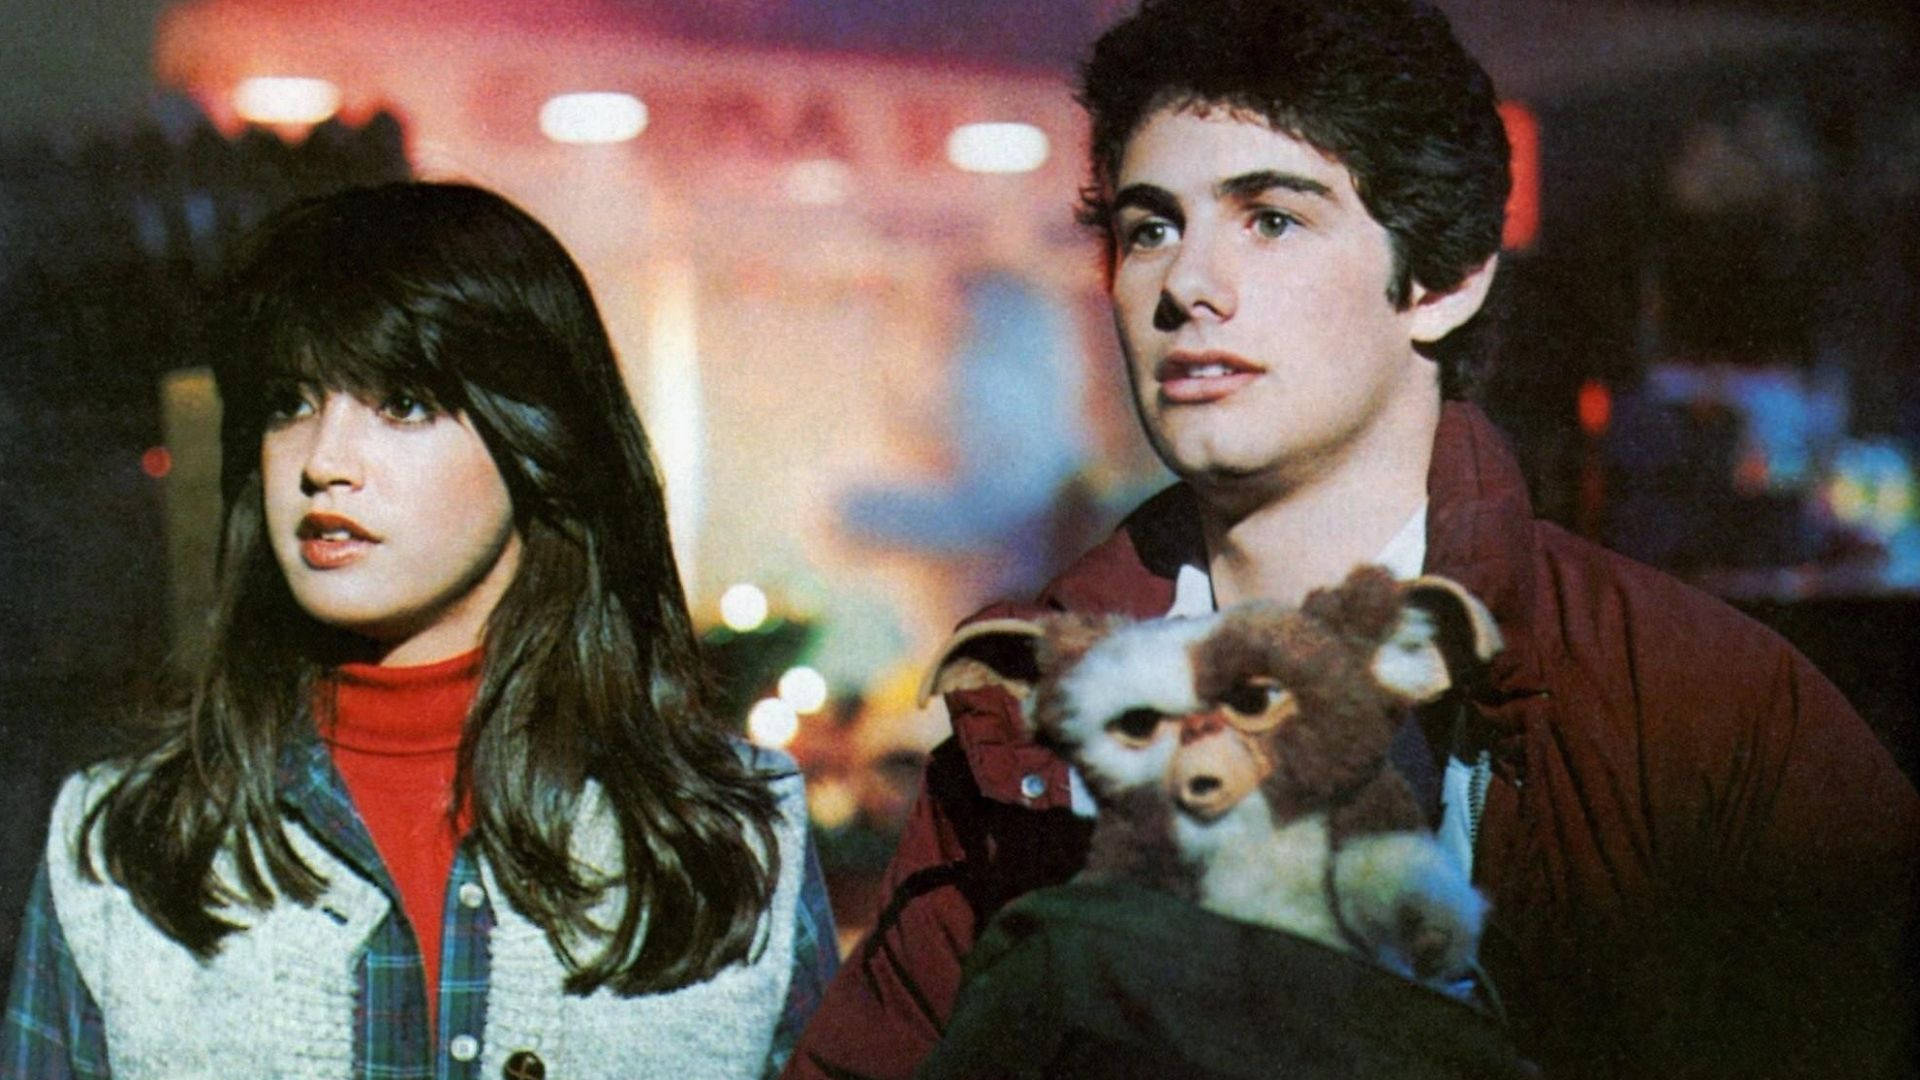 A still from the movie Gremlins starring Zach Galligan as Billy Peltzer and Phoebe Cates as Kate Beringer.